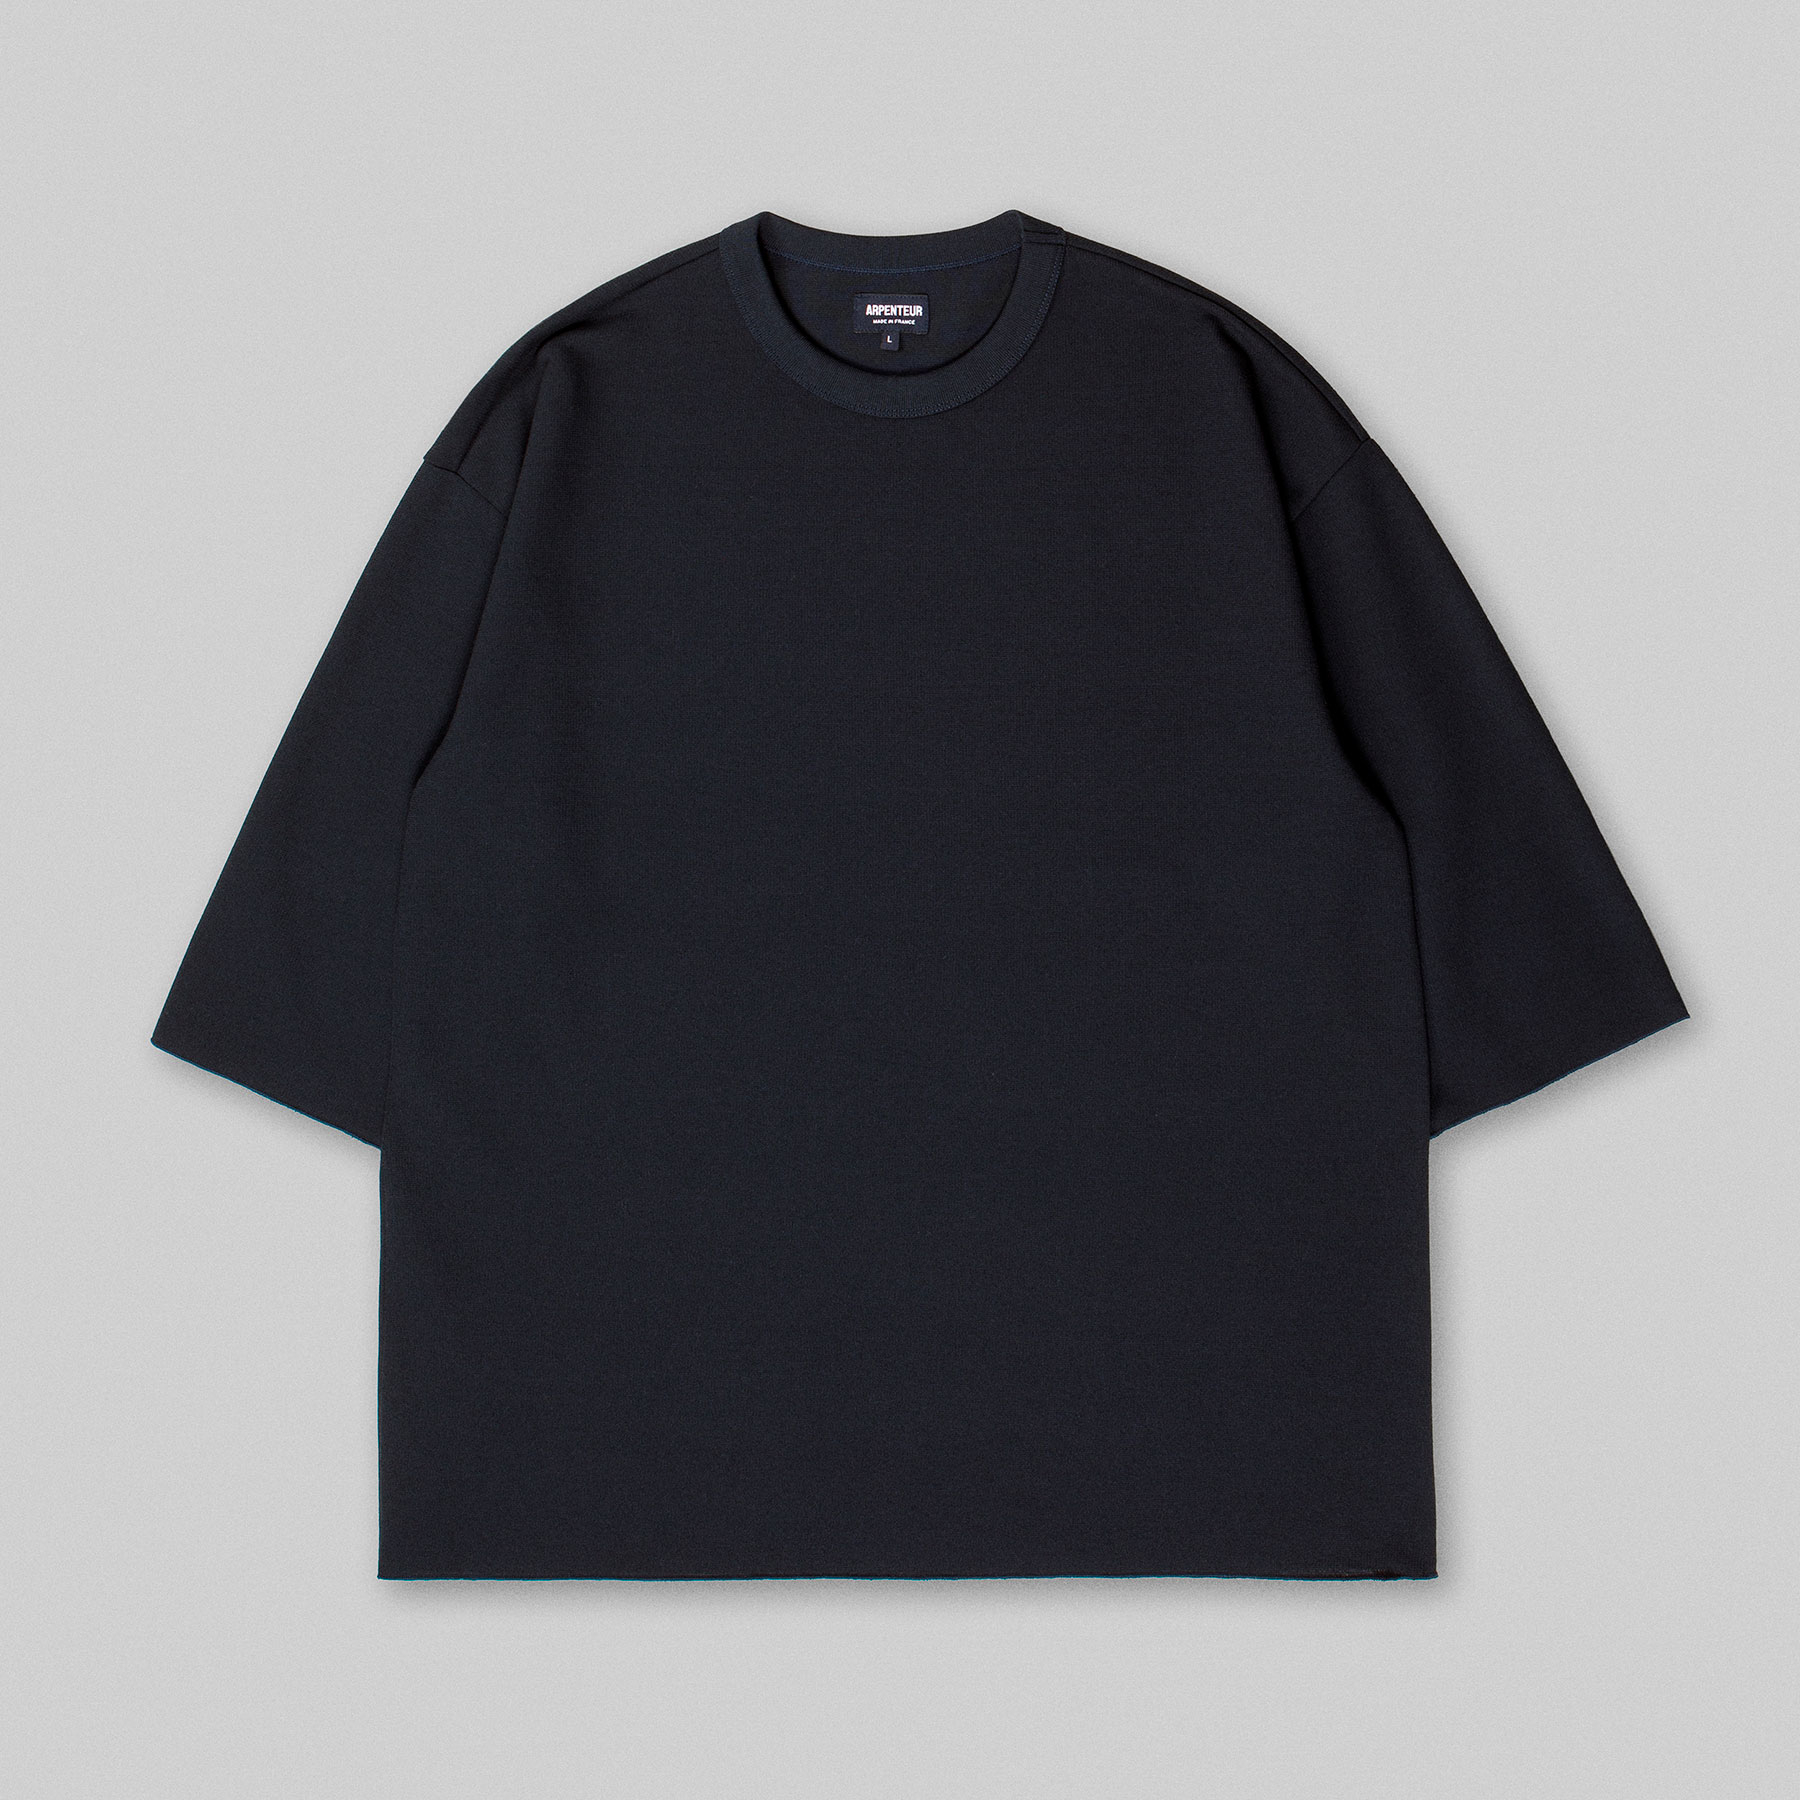 MARINIERE t-shirt by Arpenteur in Midnight color